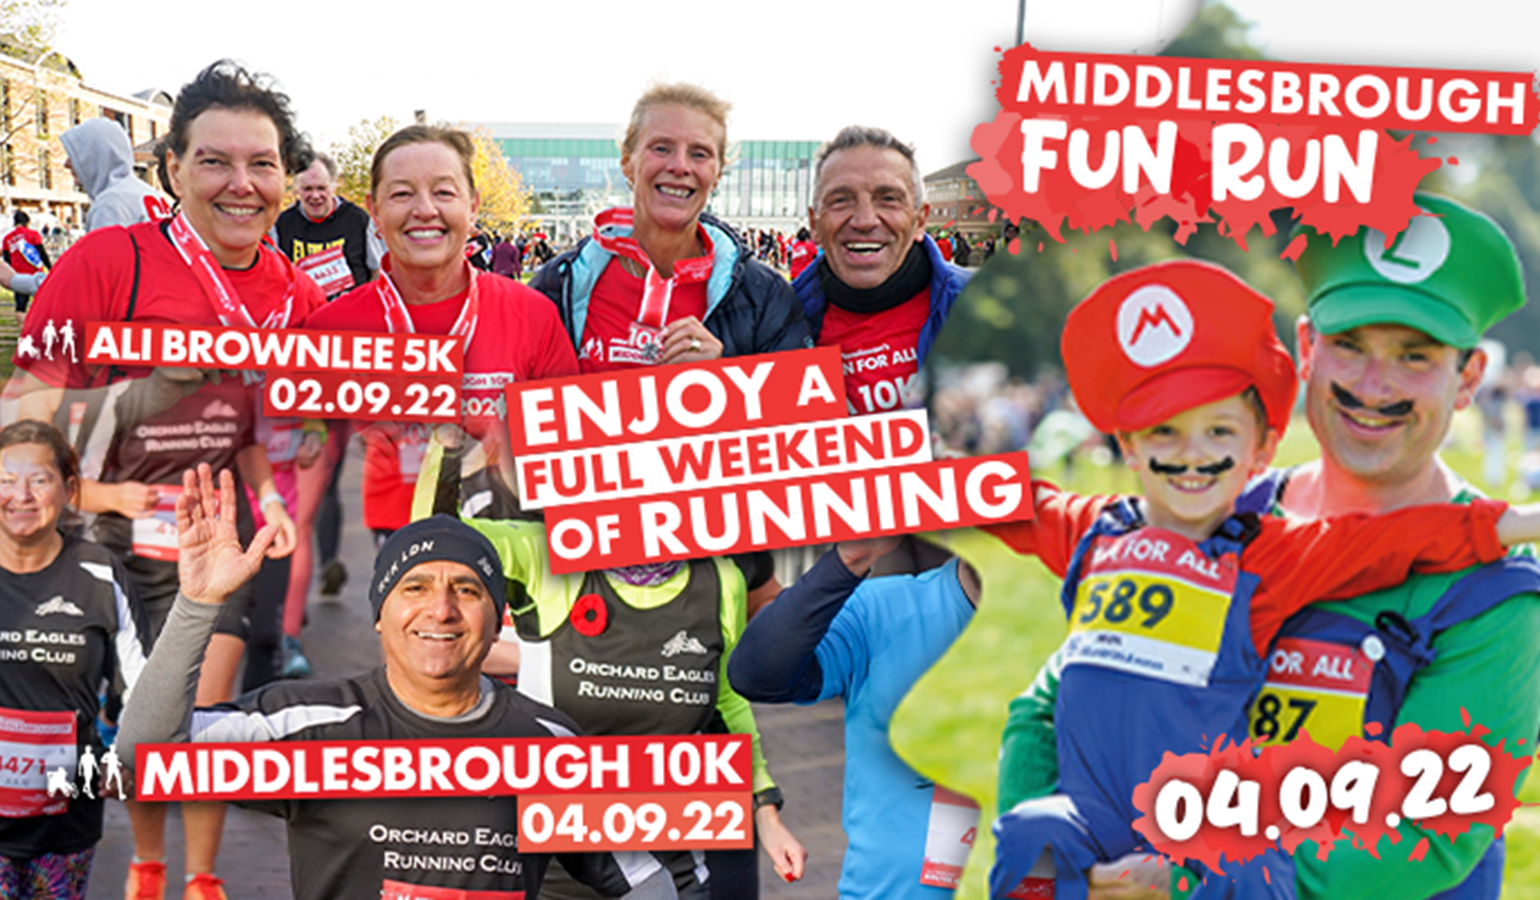 It’s set to be a festival of running in Middlesbrough! Run For All